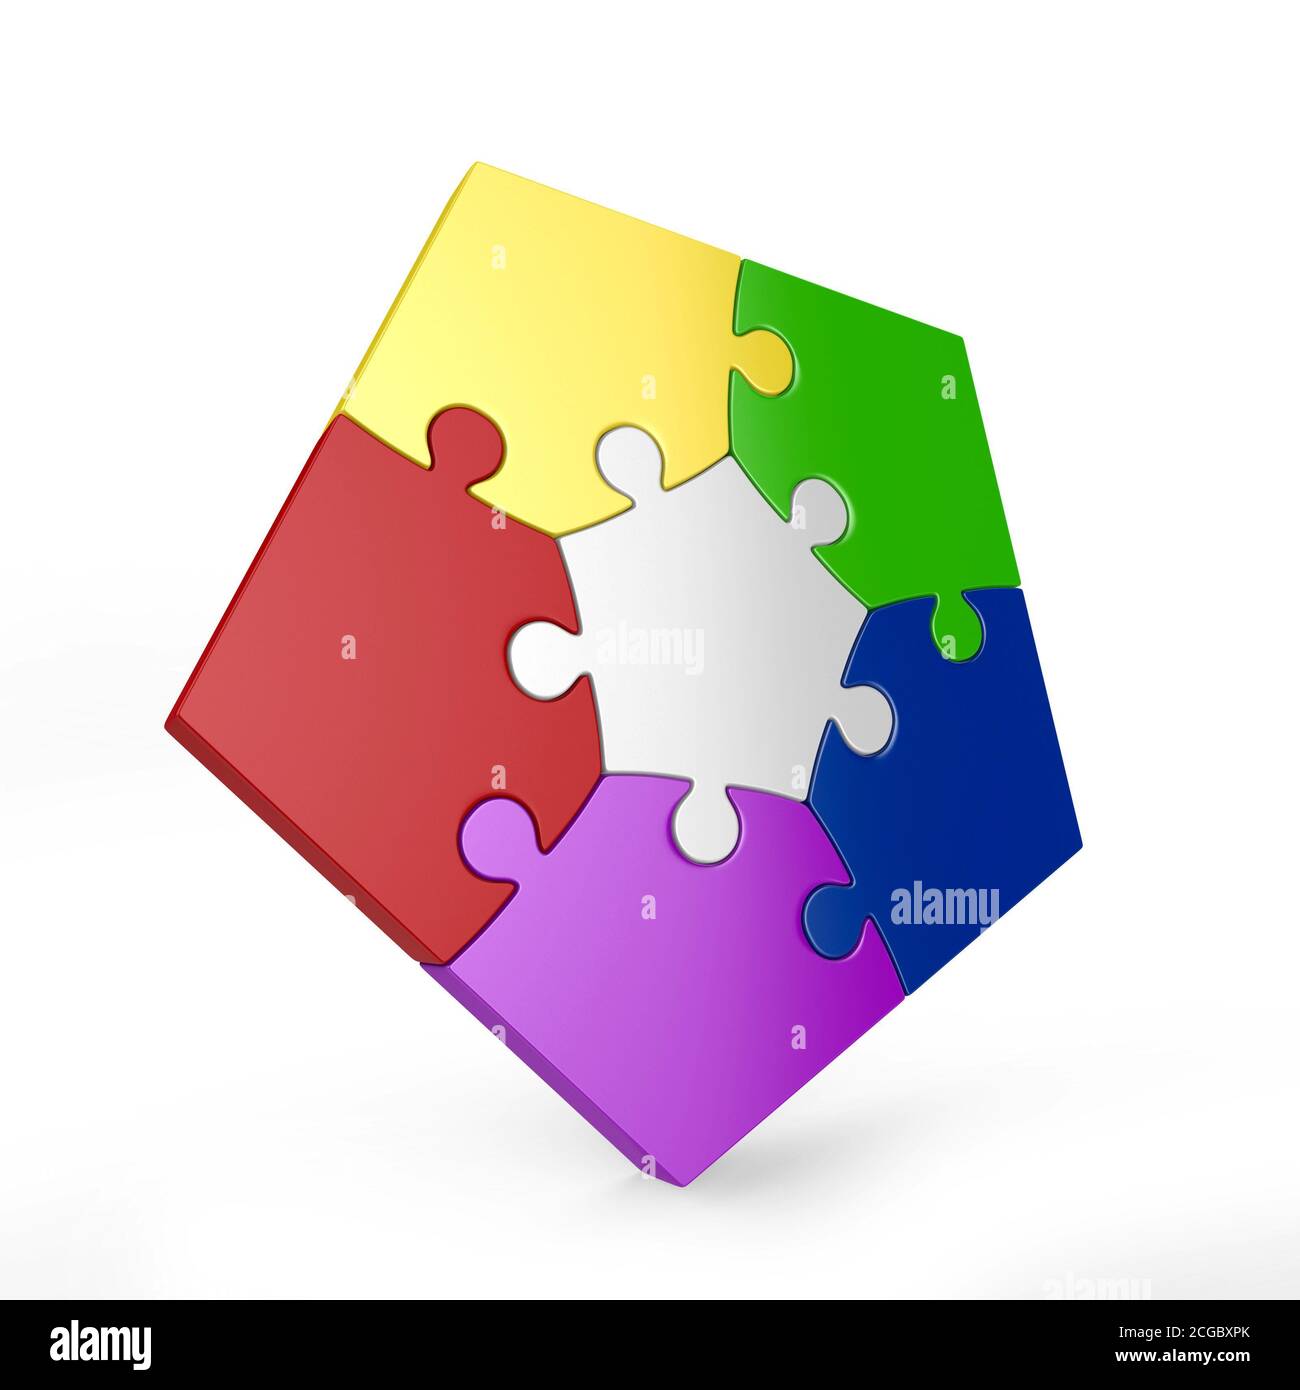 Five sided puzzles 3d rendering Stock Photo